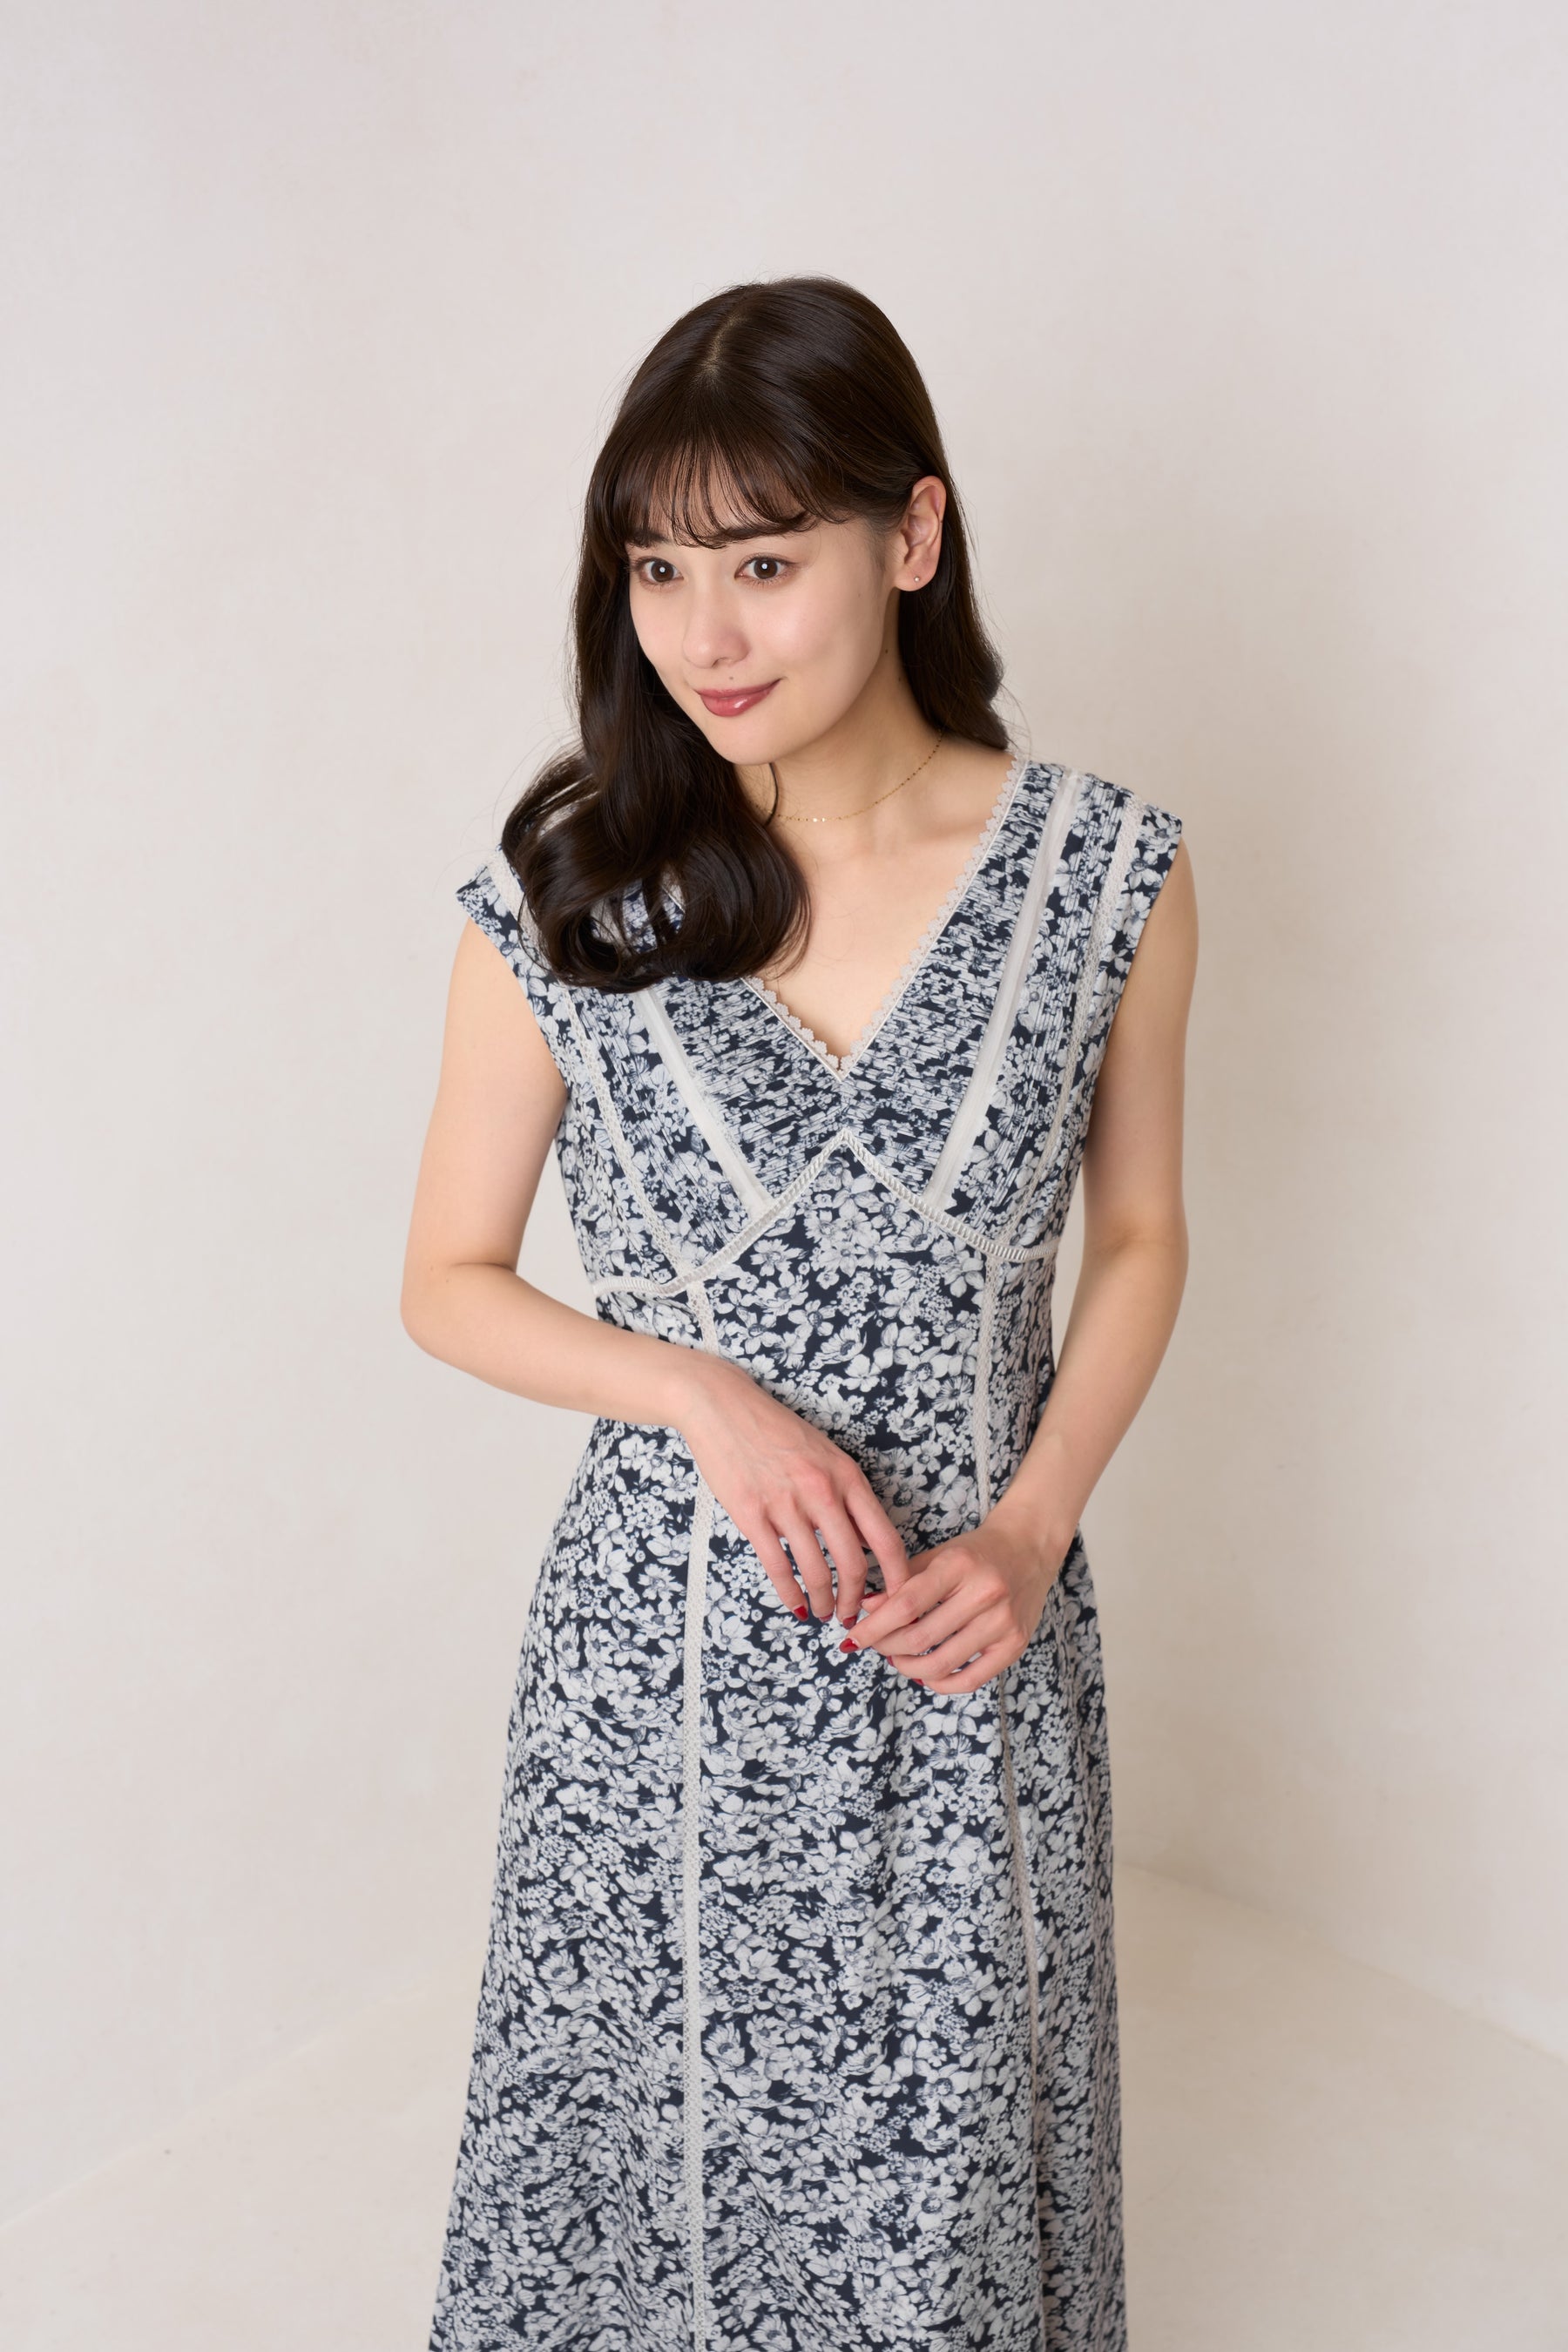 herlipto Lace Trimmed Floral Dressよろしくお願いします